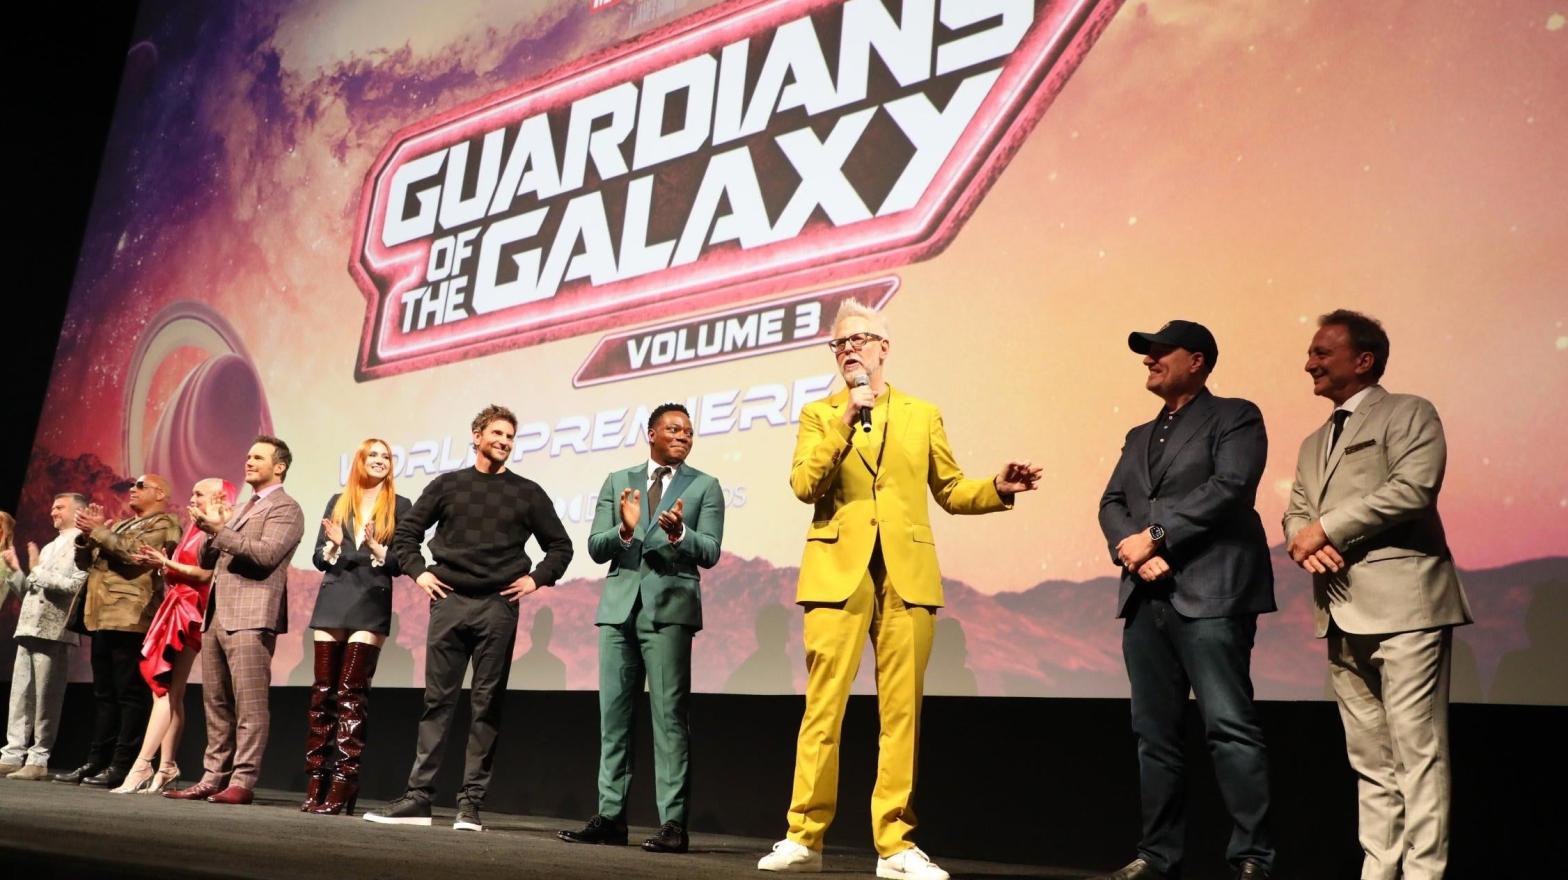 James Gunn with some of the cast and crew of Guardians of the Galaxy Vol. 3. (Image: Alex J. Berliner/AB Images for Disney)